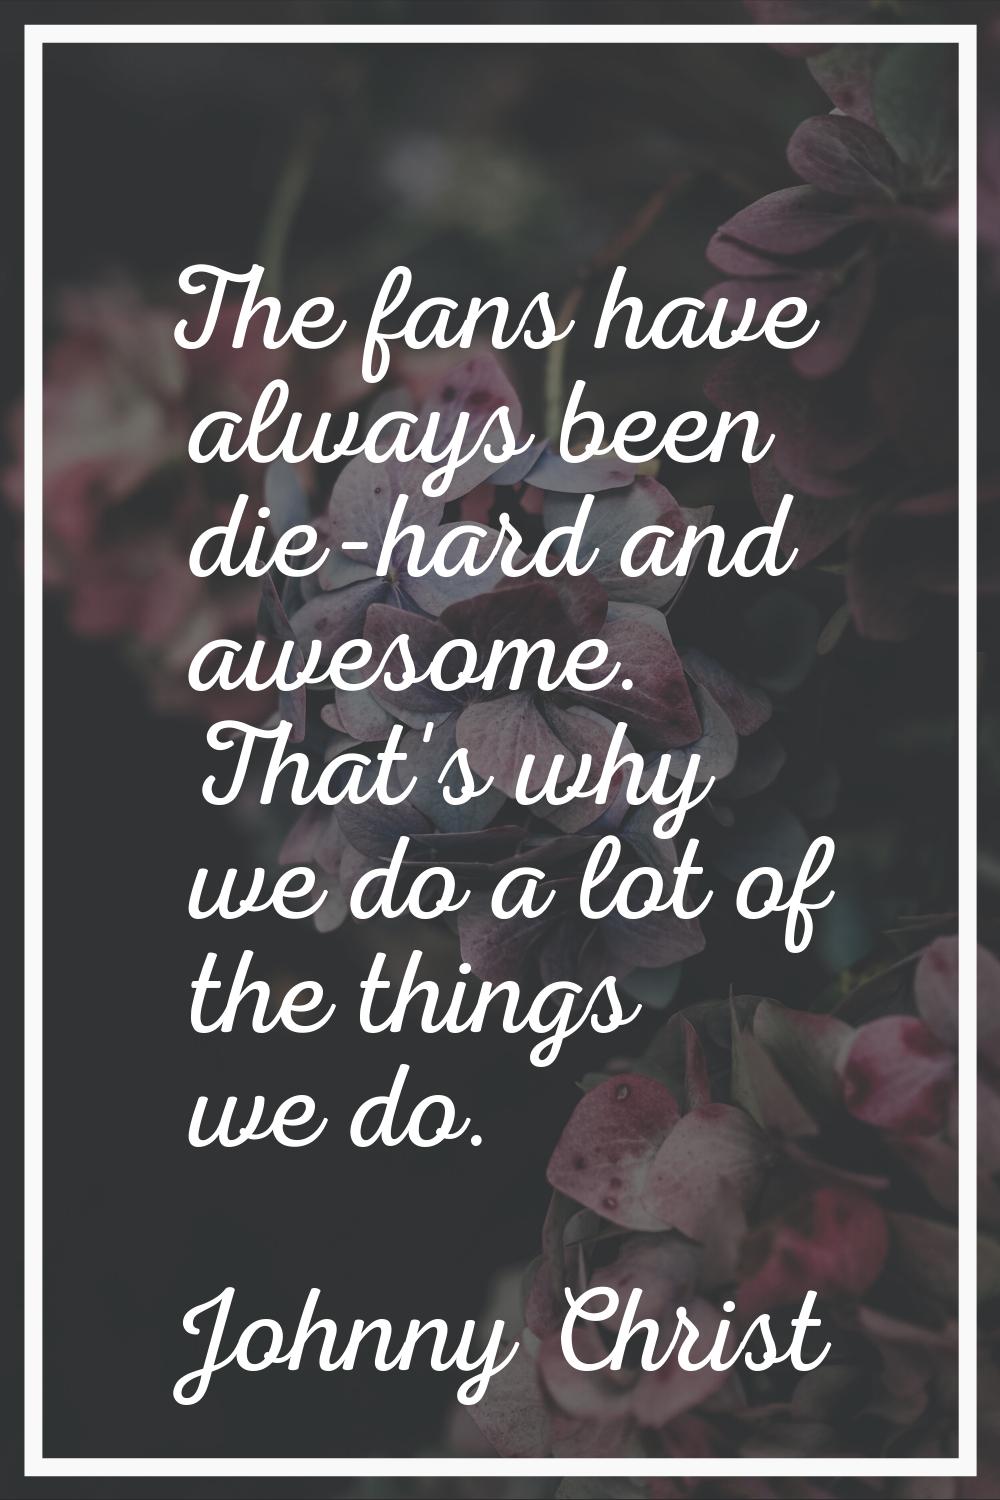 The fans have always been die-hard and awesome. That's why we do a lot of the things we do.